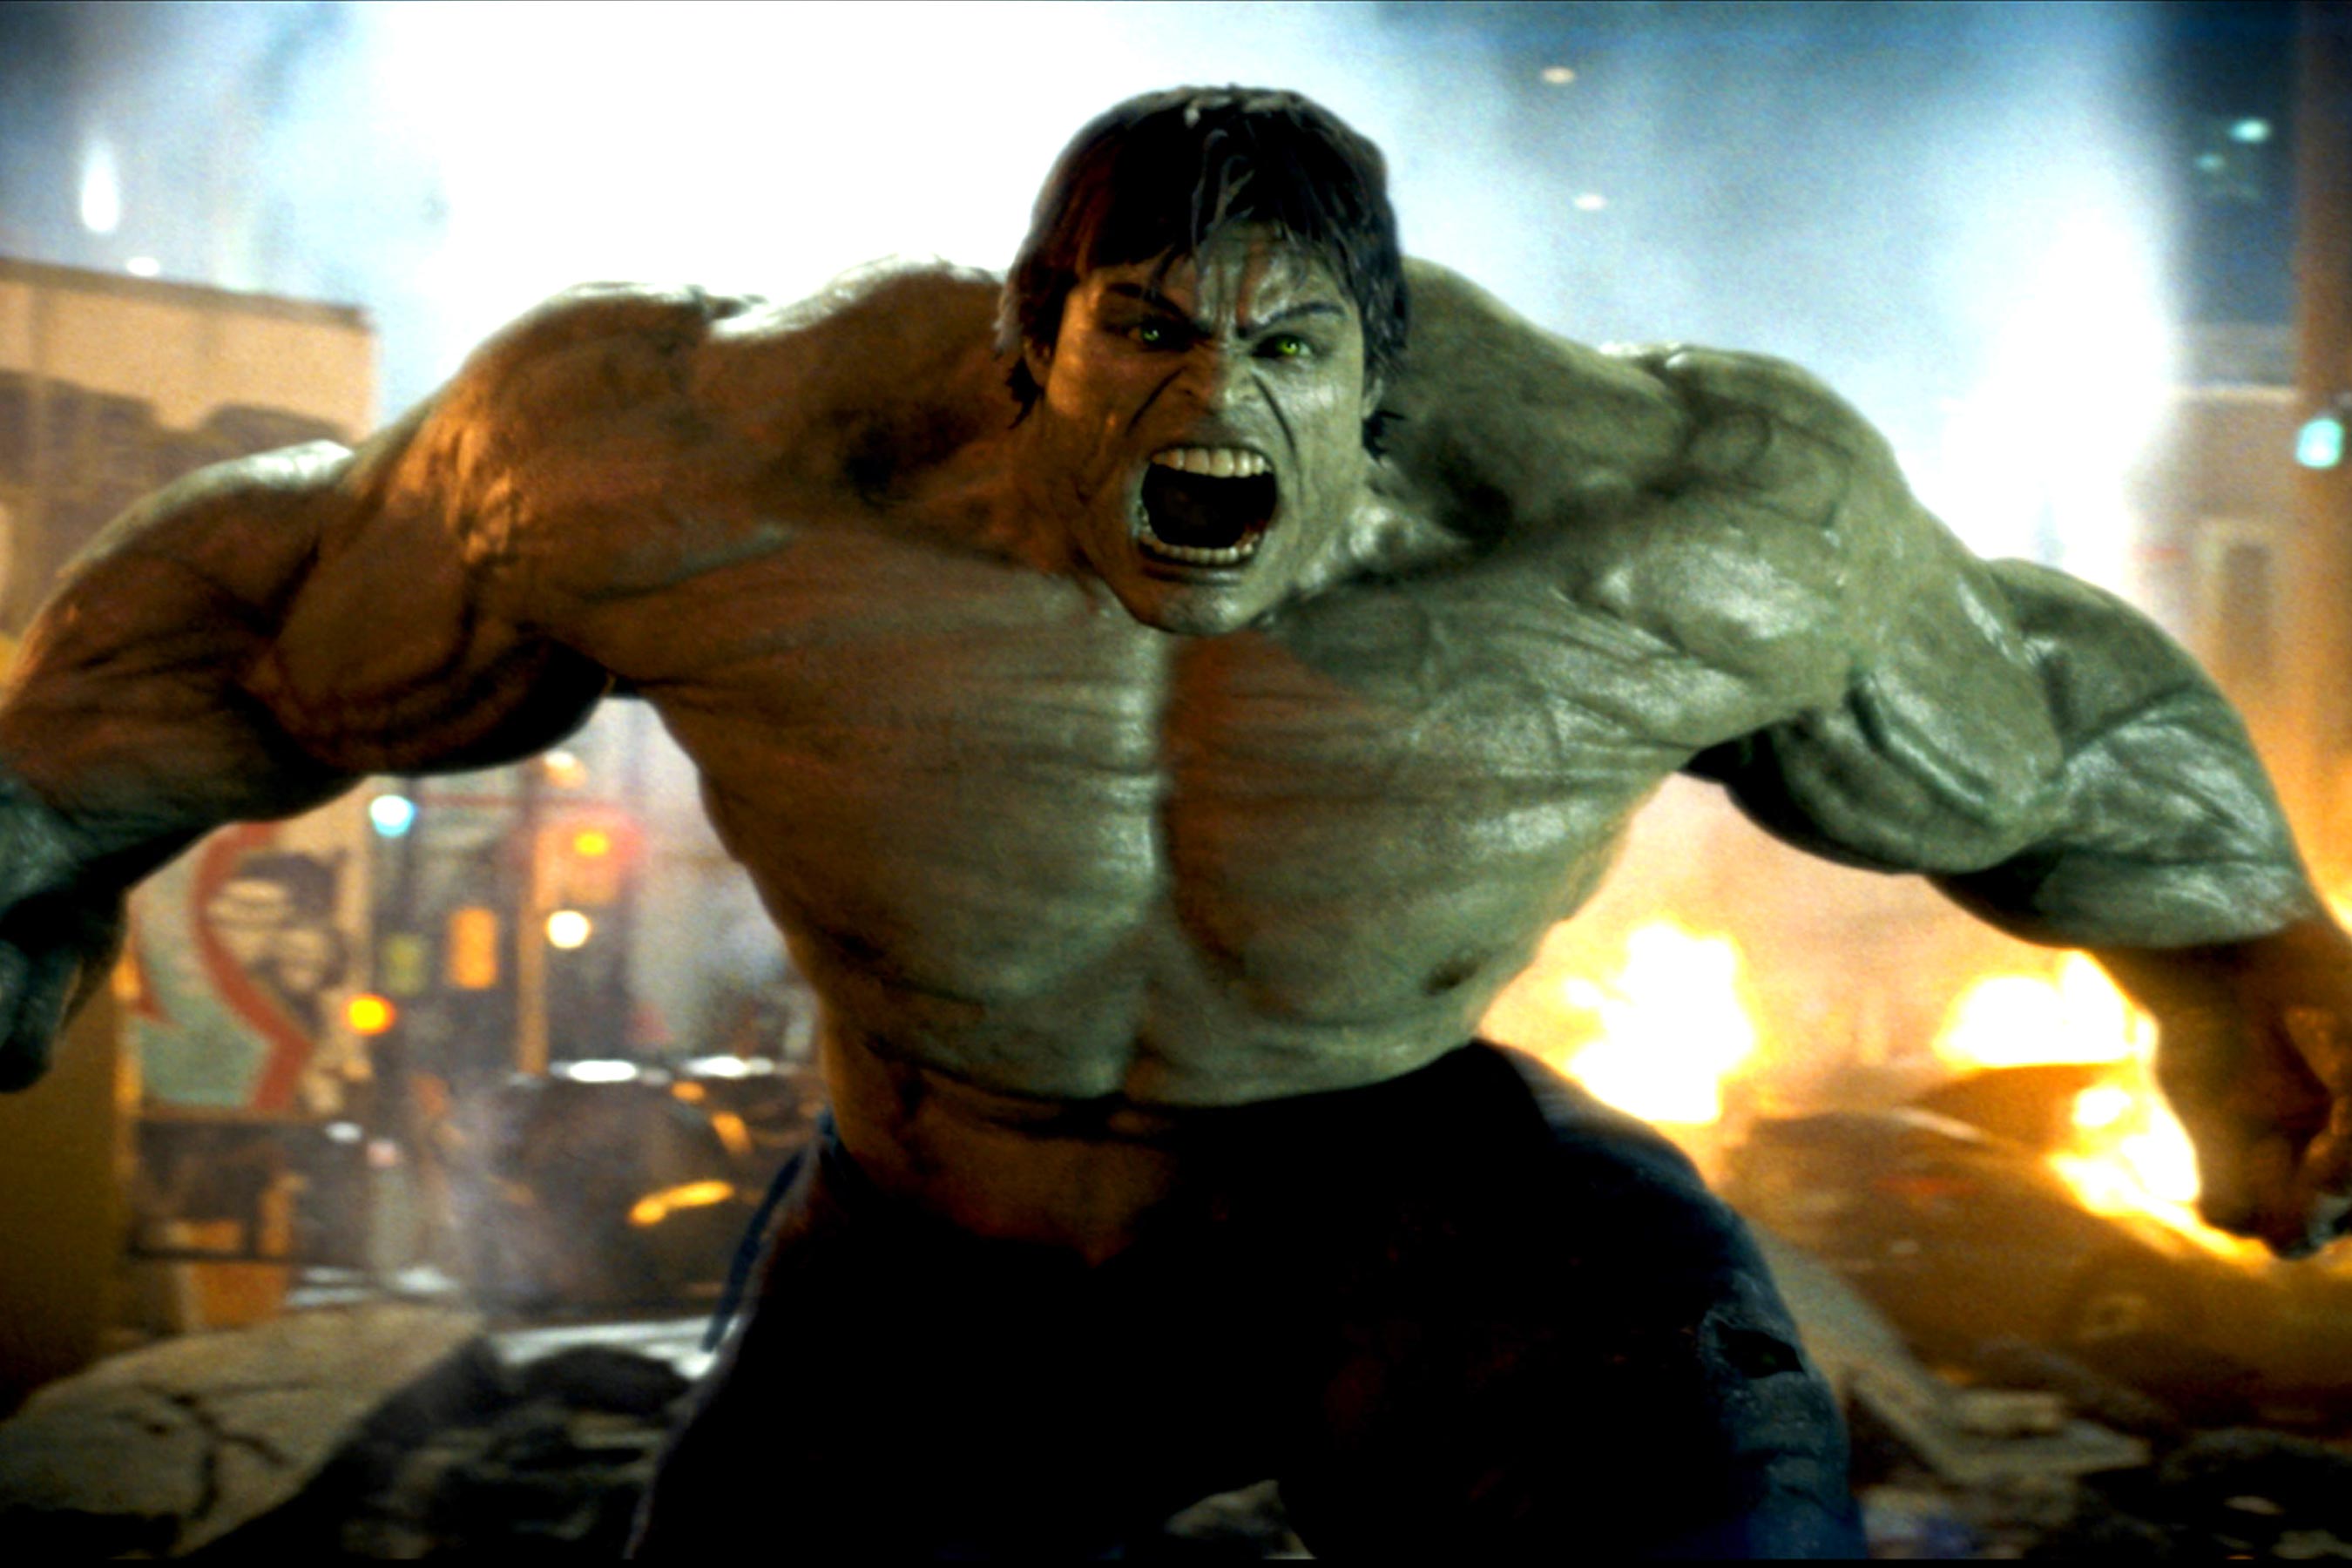 Which Original Avenger Are You? The Incredible Hulk (2008)